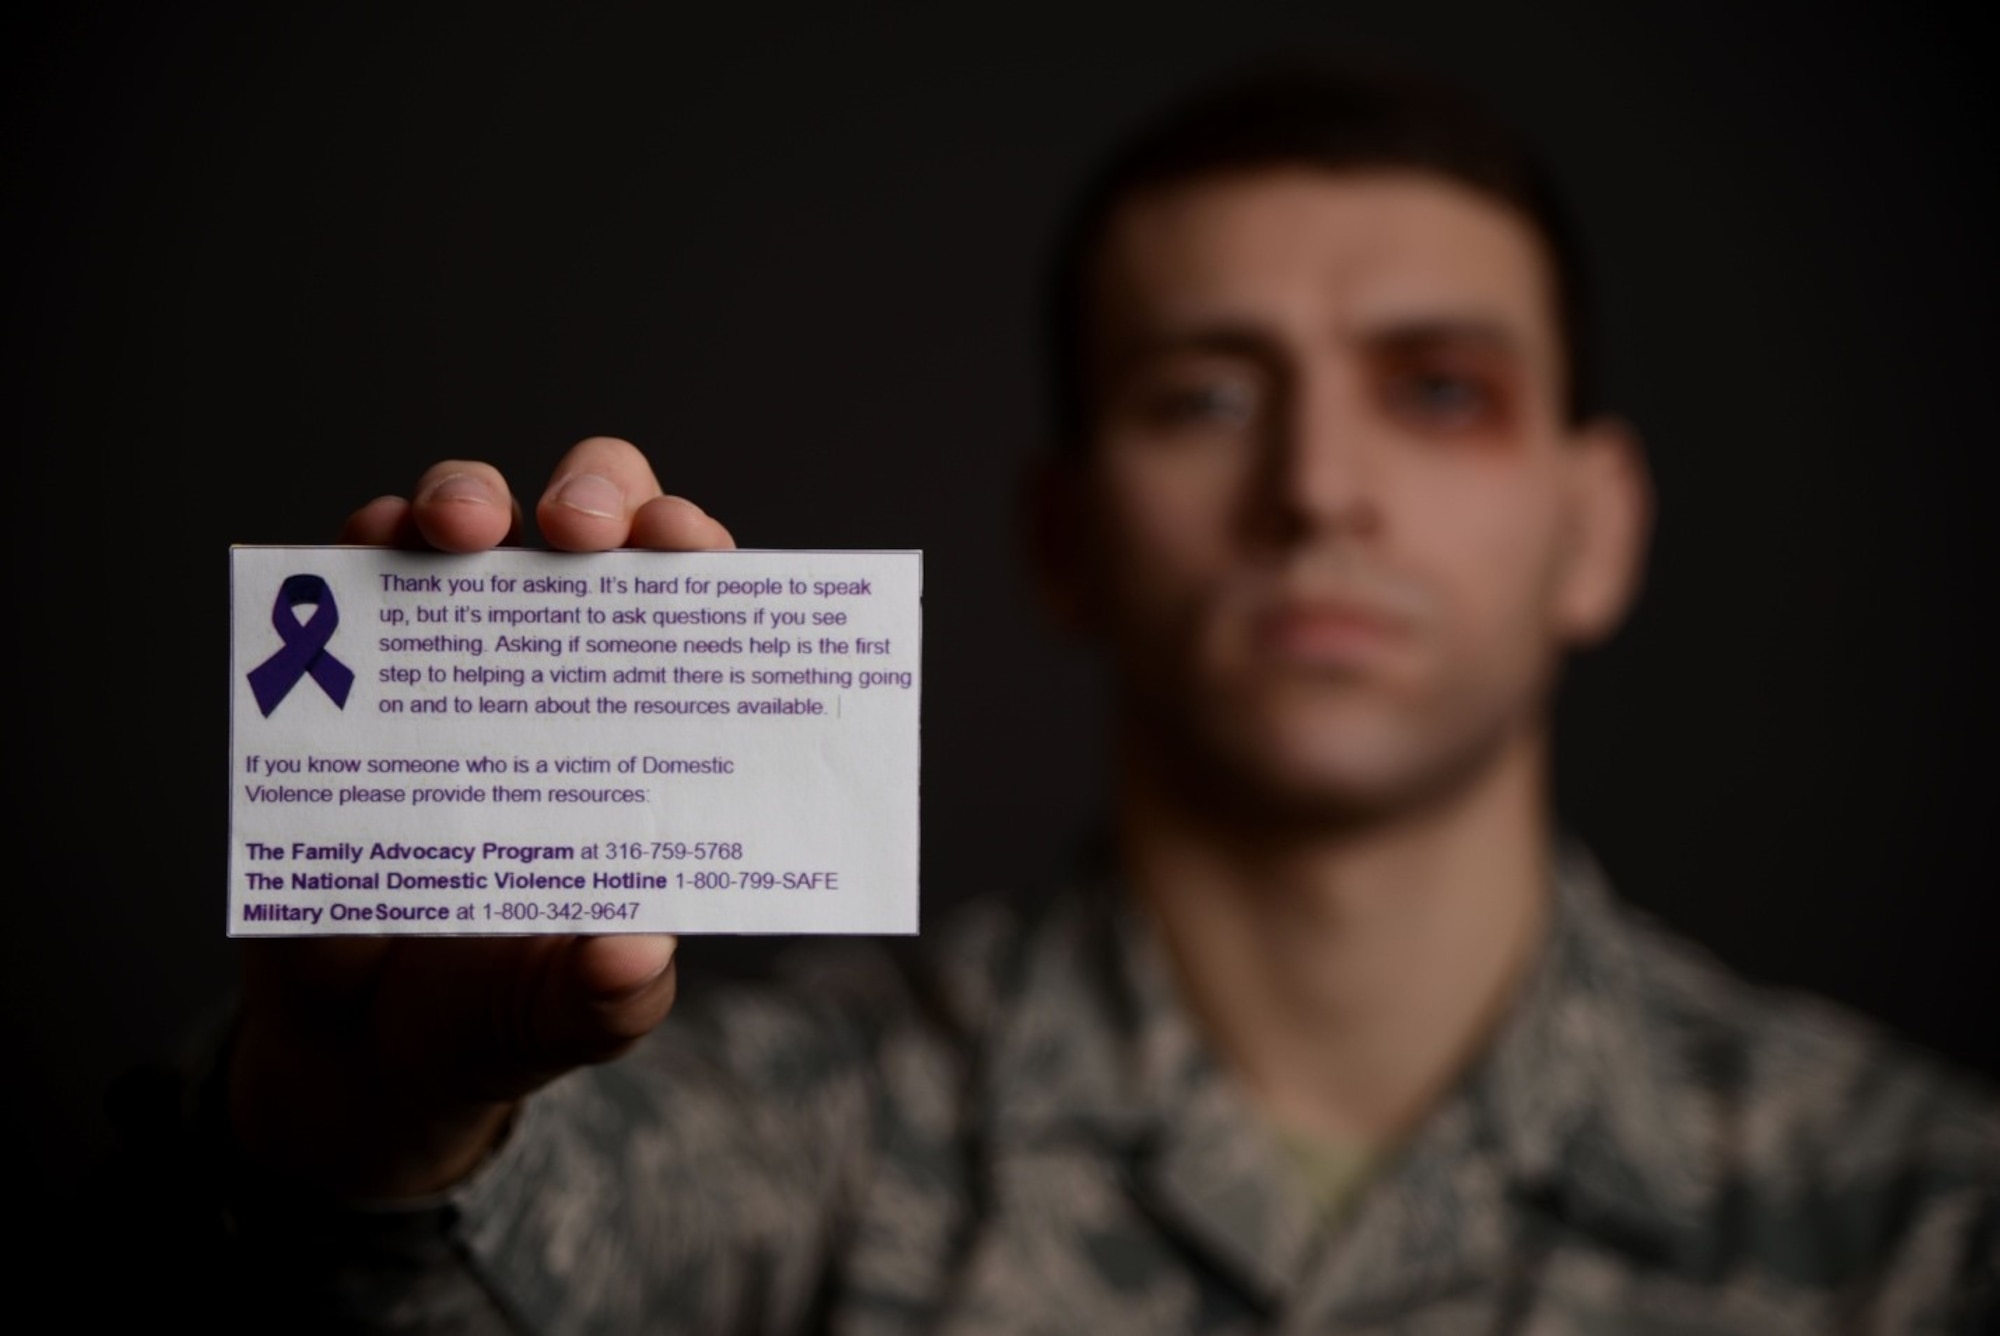 Airman 1st Class Marc Garcia, 22nd Wing Staff Agencies photojournalist, holds up a Violence 
Prevention card Oct. 30, 2019, at McConnell Air Force Base, Kan. The cards were handed to concerned individuals who chose to speak up and ask about the volunteer’s black eye. Printed on each card was a message thanking the individual for speaking up, as well as further information on domestic violence. (U.S. Air Force photo by Airman 1st Class Nilsa E. Garcia)